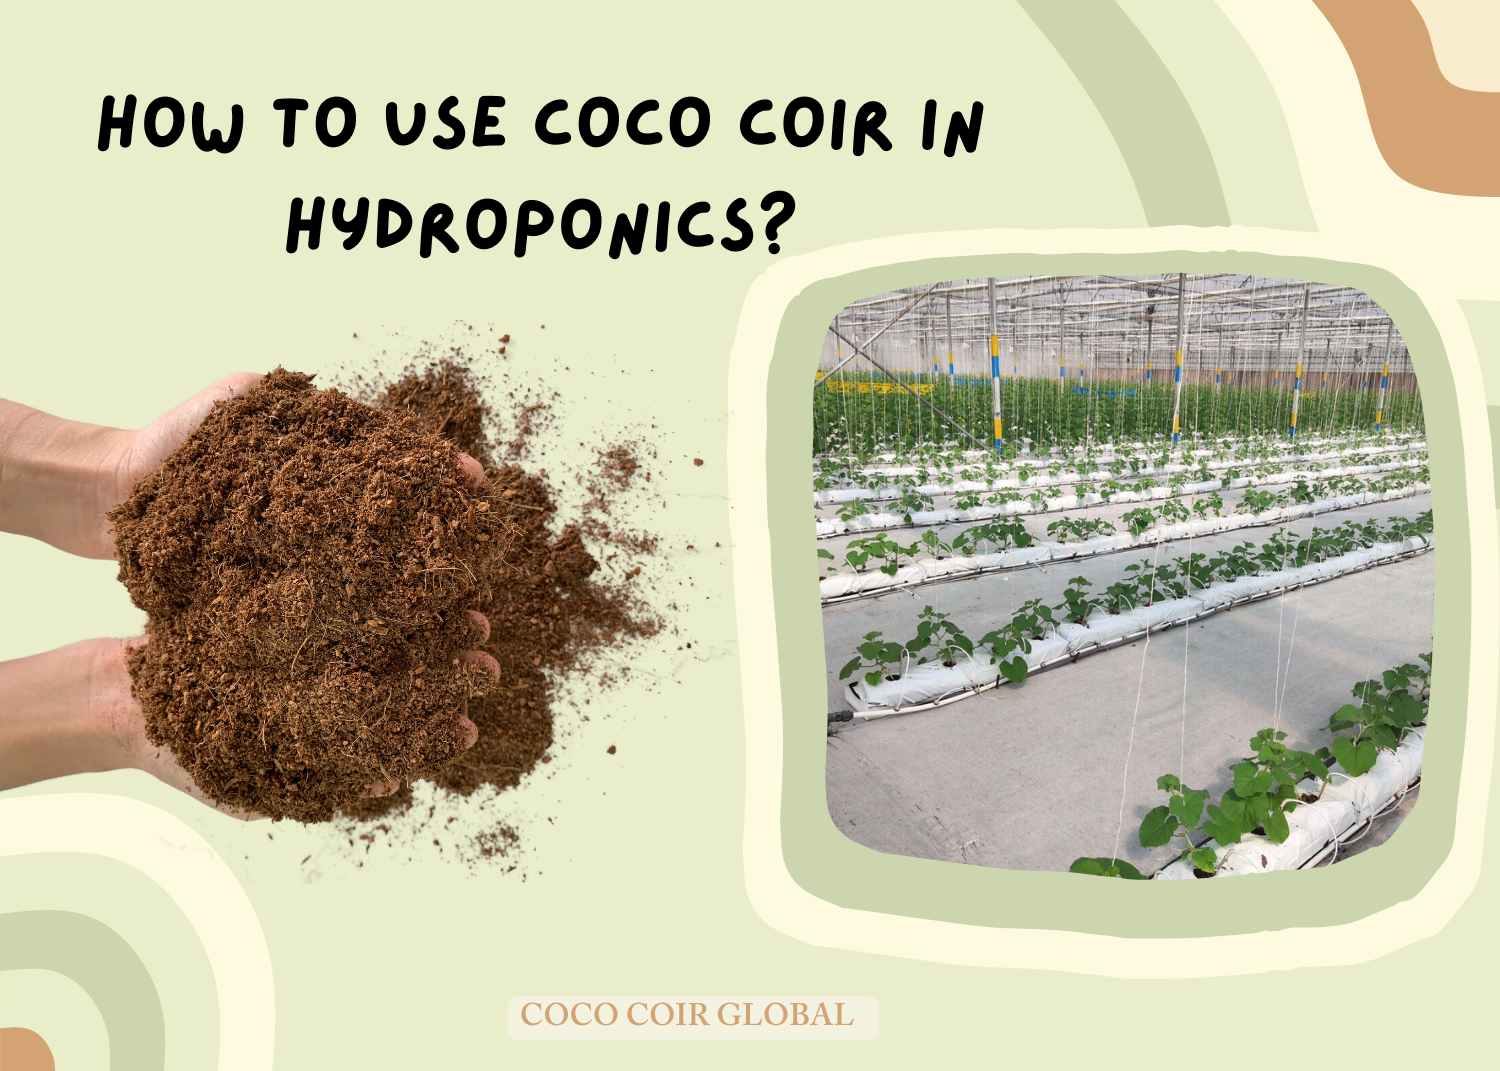 How to use Coco Coir in hydroponics